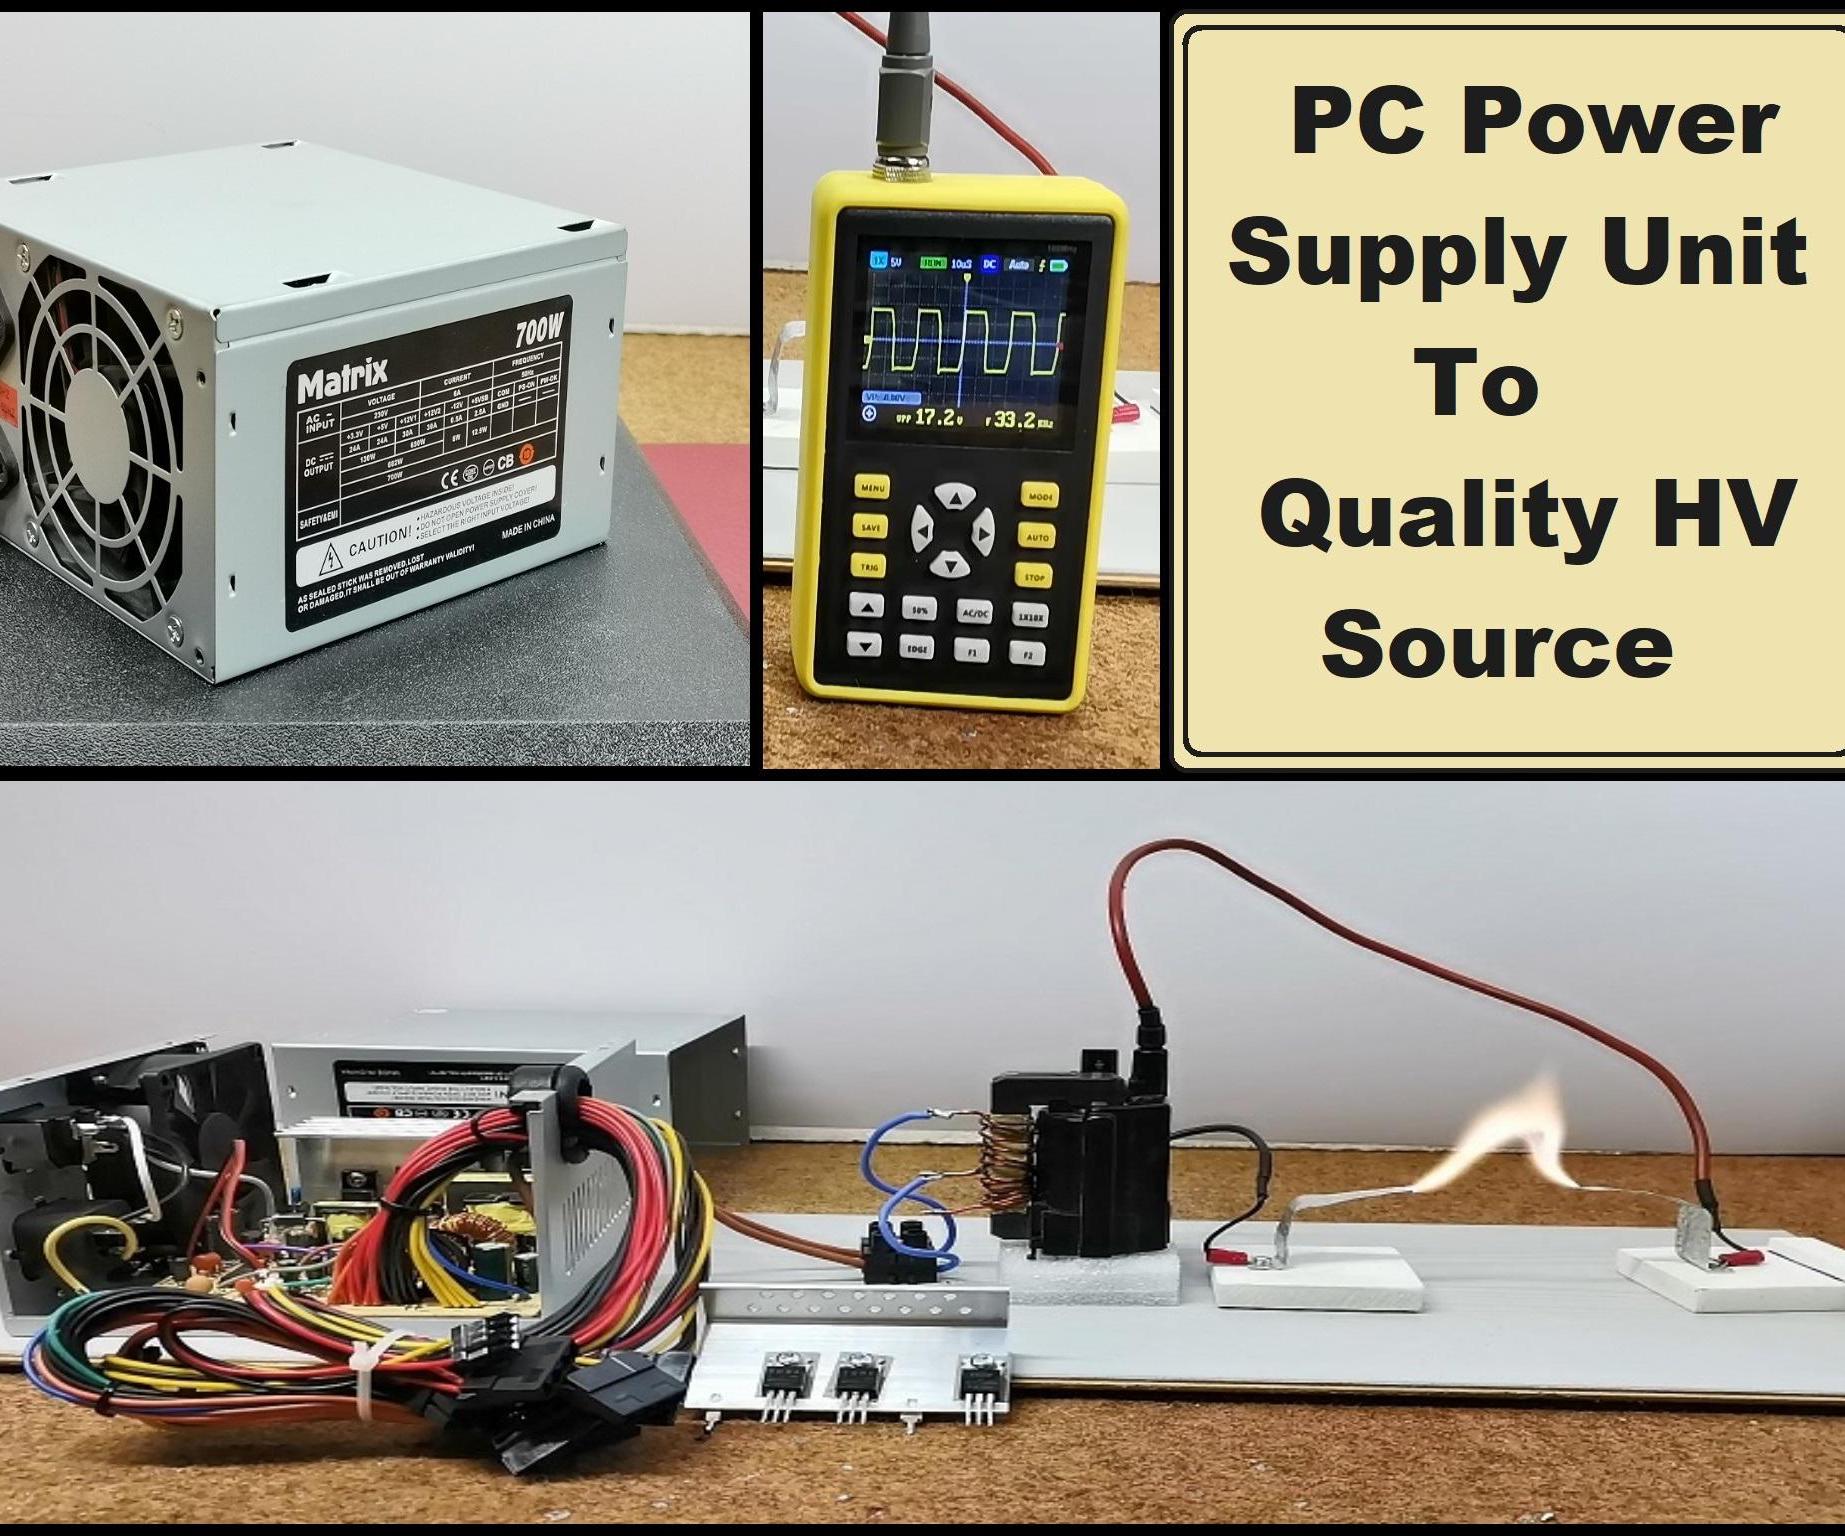 The Simplest Way to Make a Quality HV (High Voltage) Source From a PC Power Supply